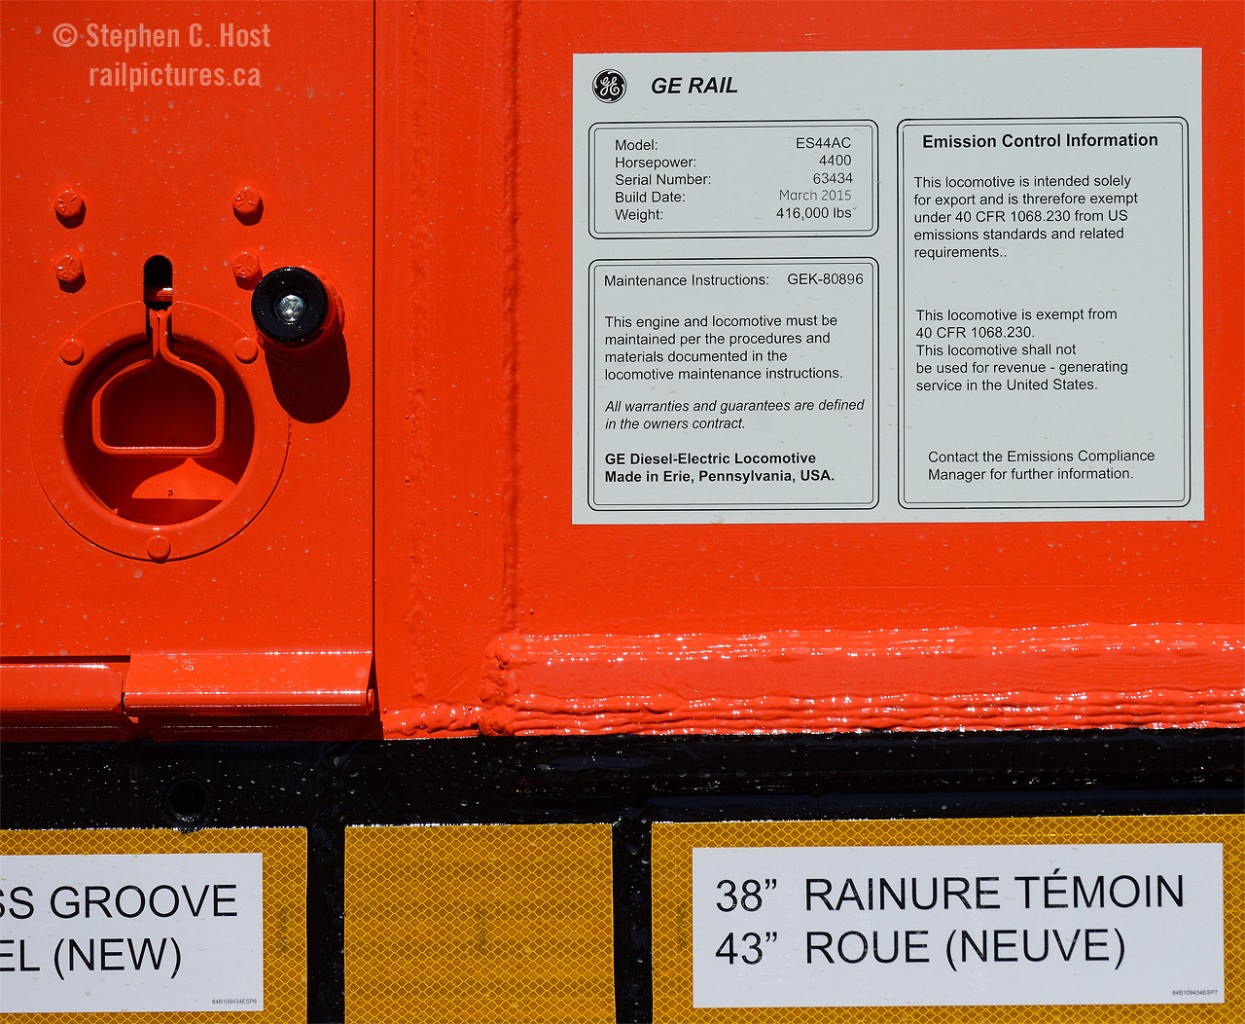 An interesting detail - note the exemption and export notice on the right side of the 'builder sticker' of CN 2969.
Why is it that EMD is not able to perform similar manufacturing for export for Canada. Would EMD not be desperate for some business given the lack of Tier 4 availability? Discuss below.